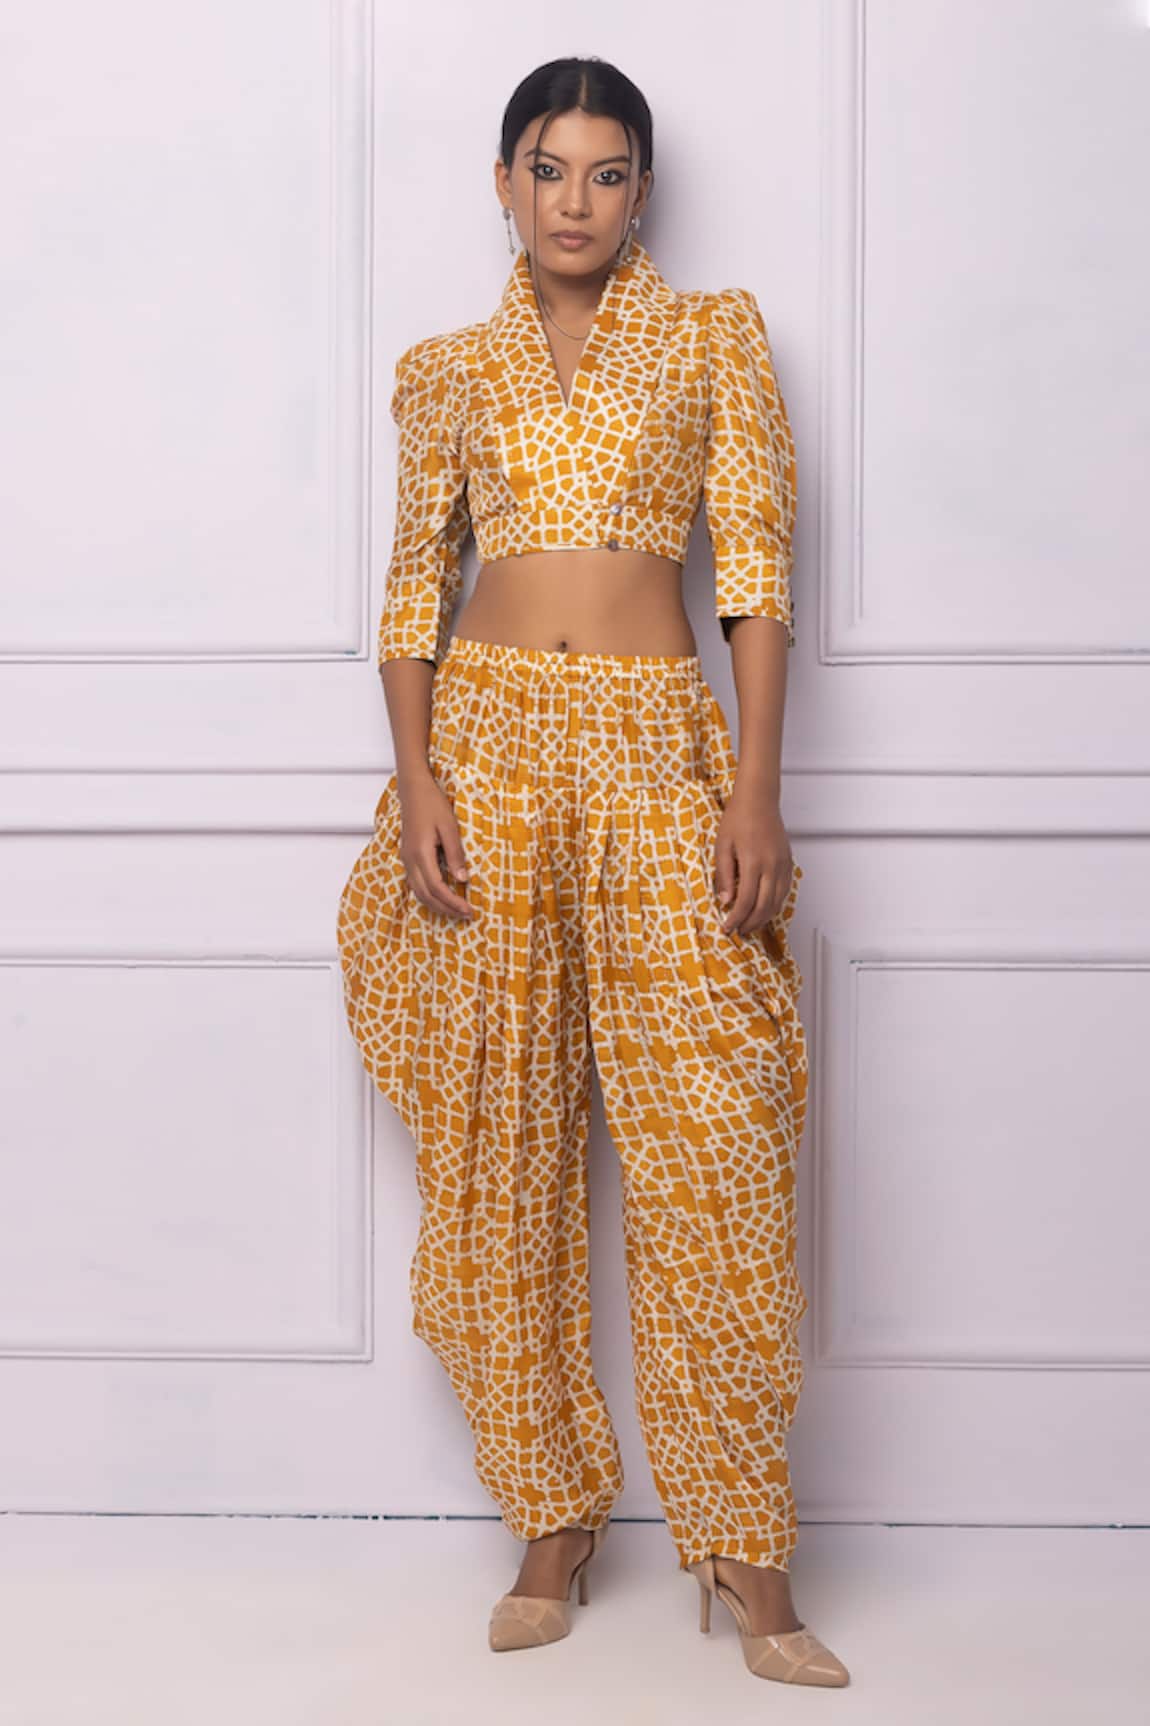 Buy Womens Rayon Dhoti Harem Pants Indian Womens Online in India  Etsy